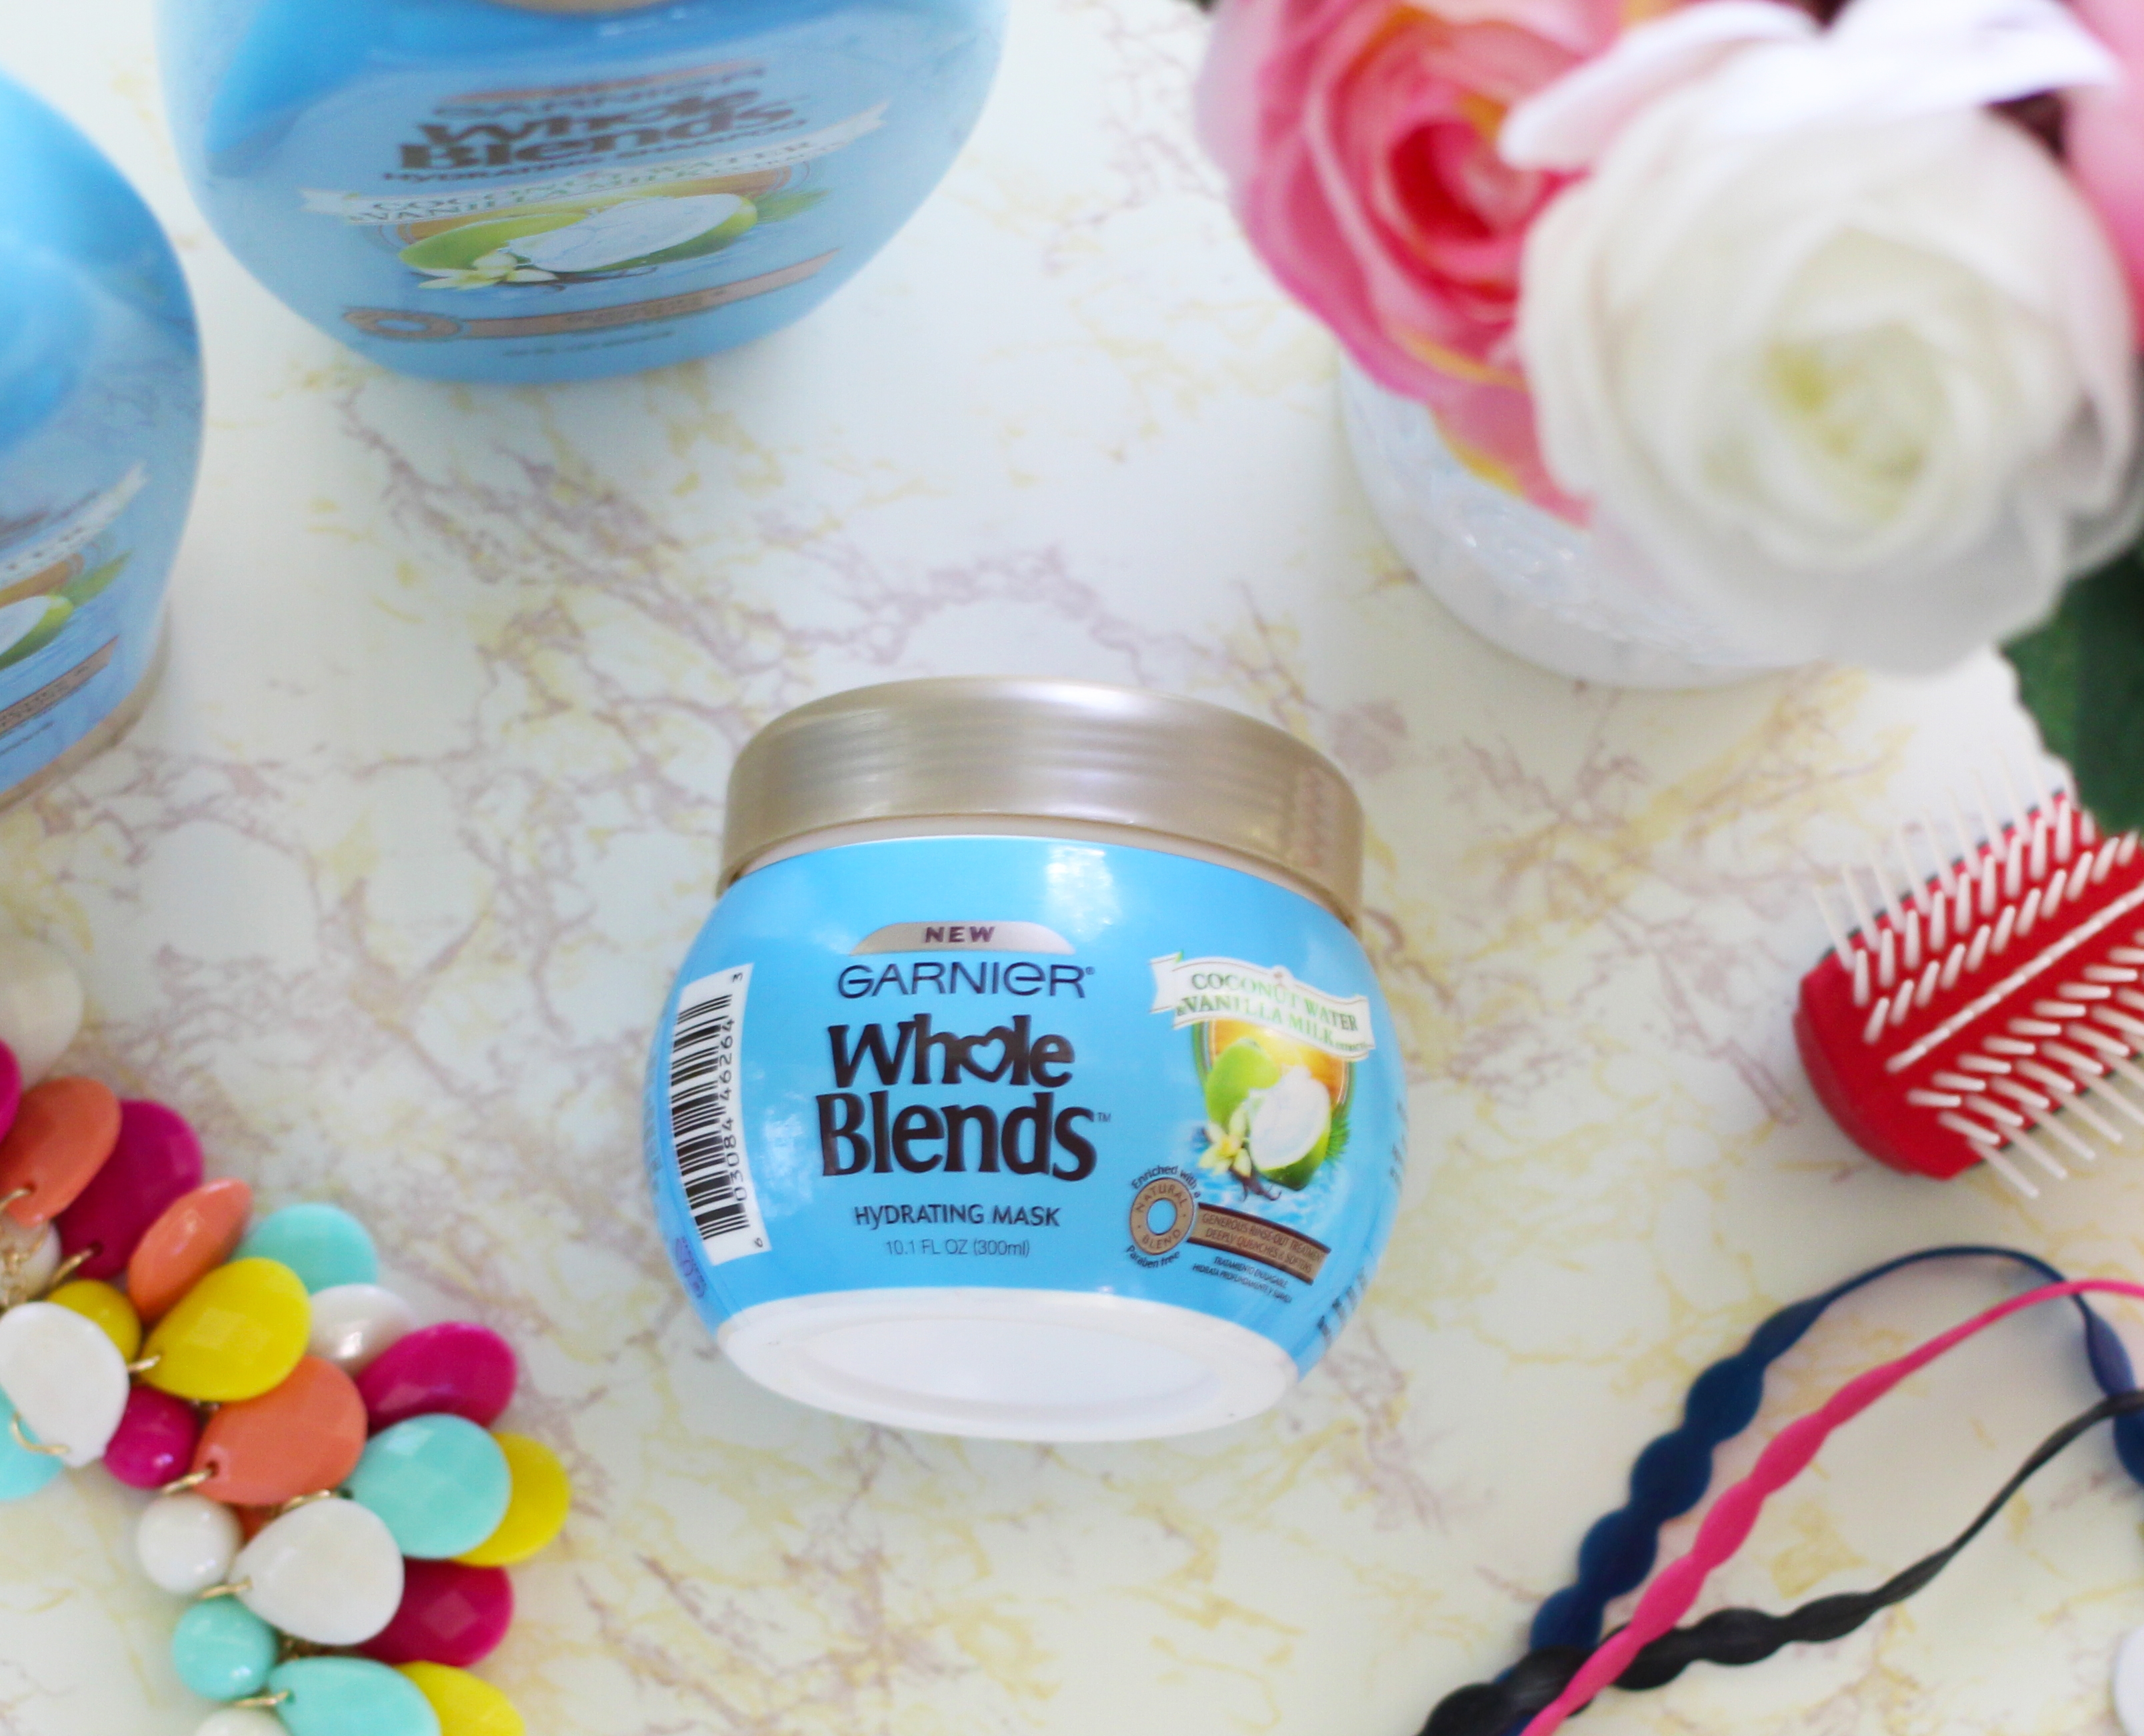 5 Tips For Perfect Summer Hair with Garnier Whole Blends Hydrating Mask